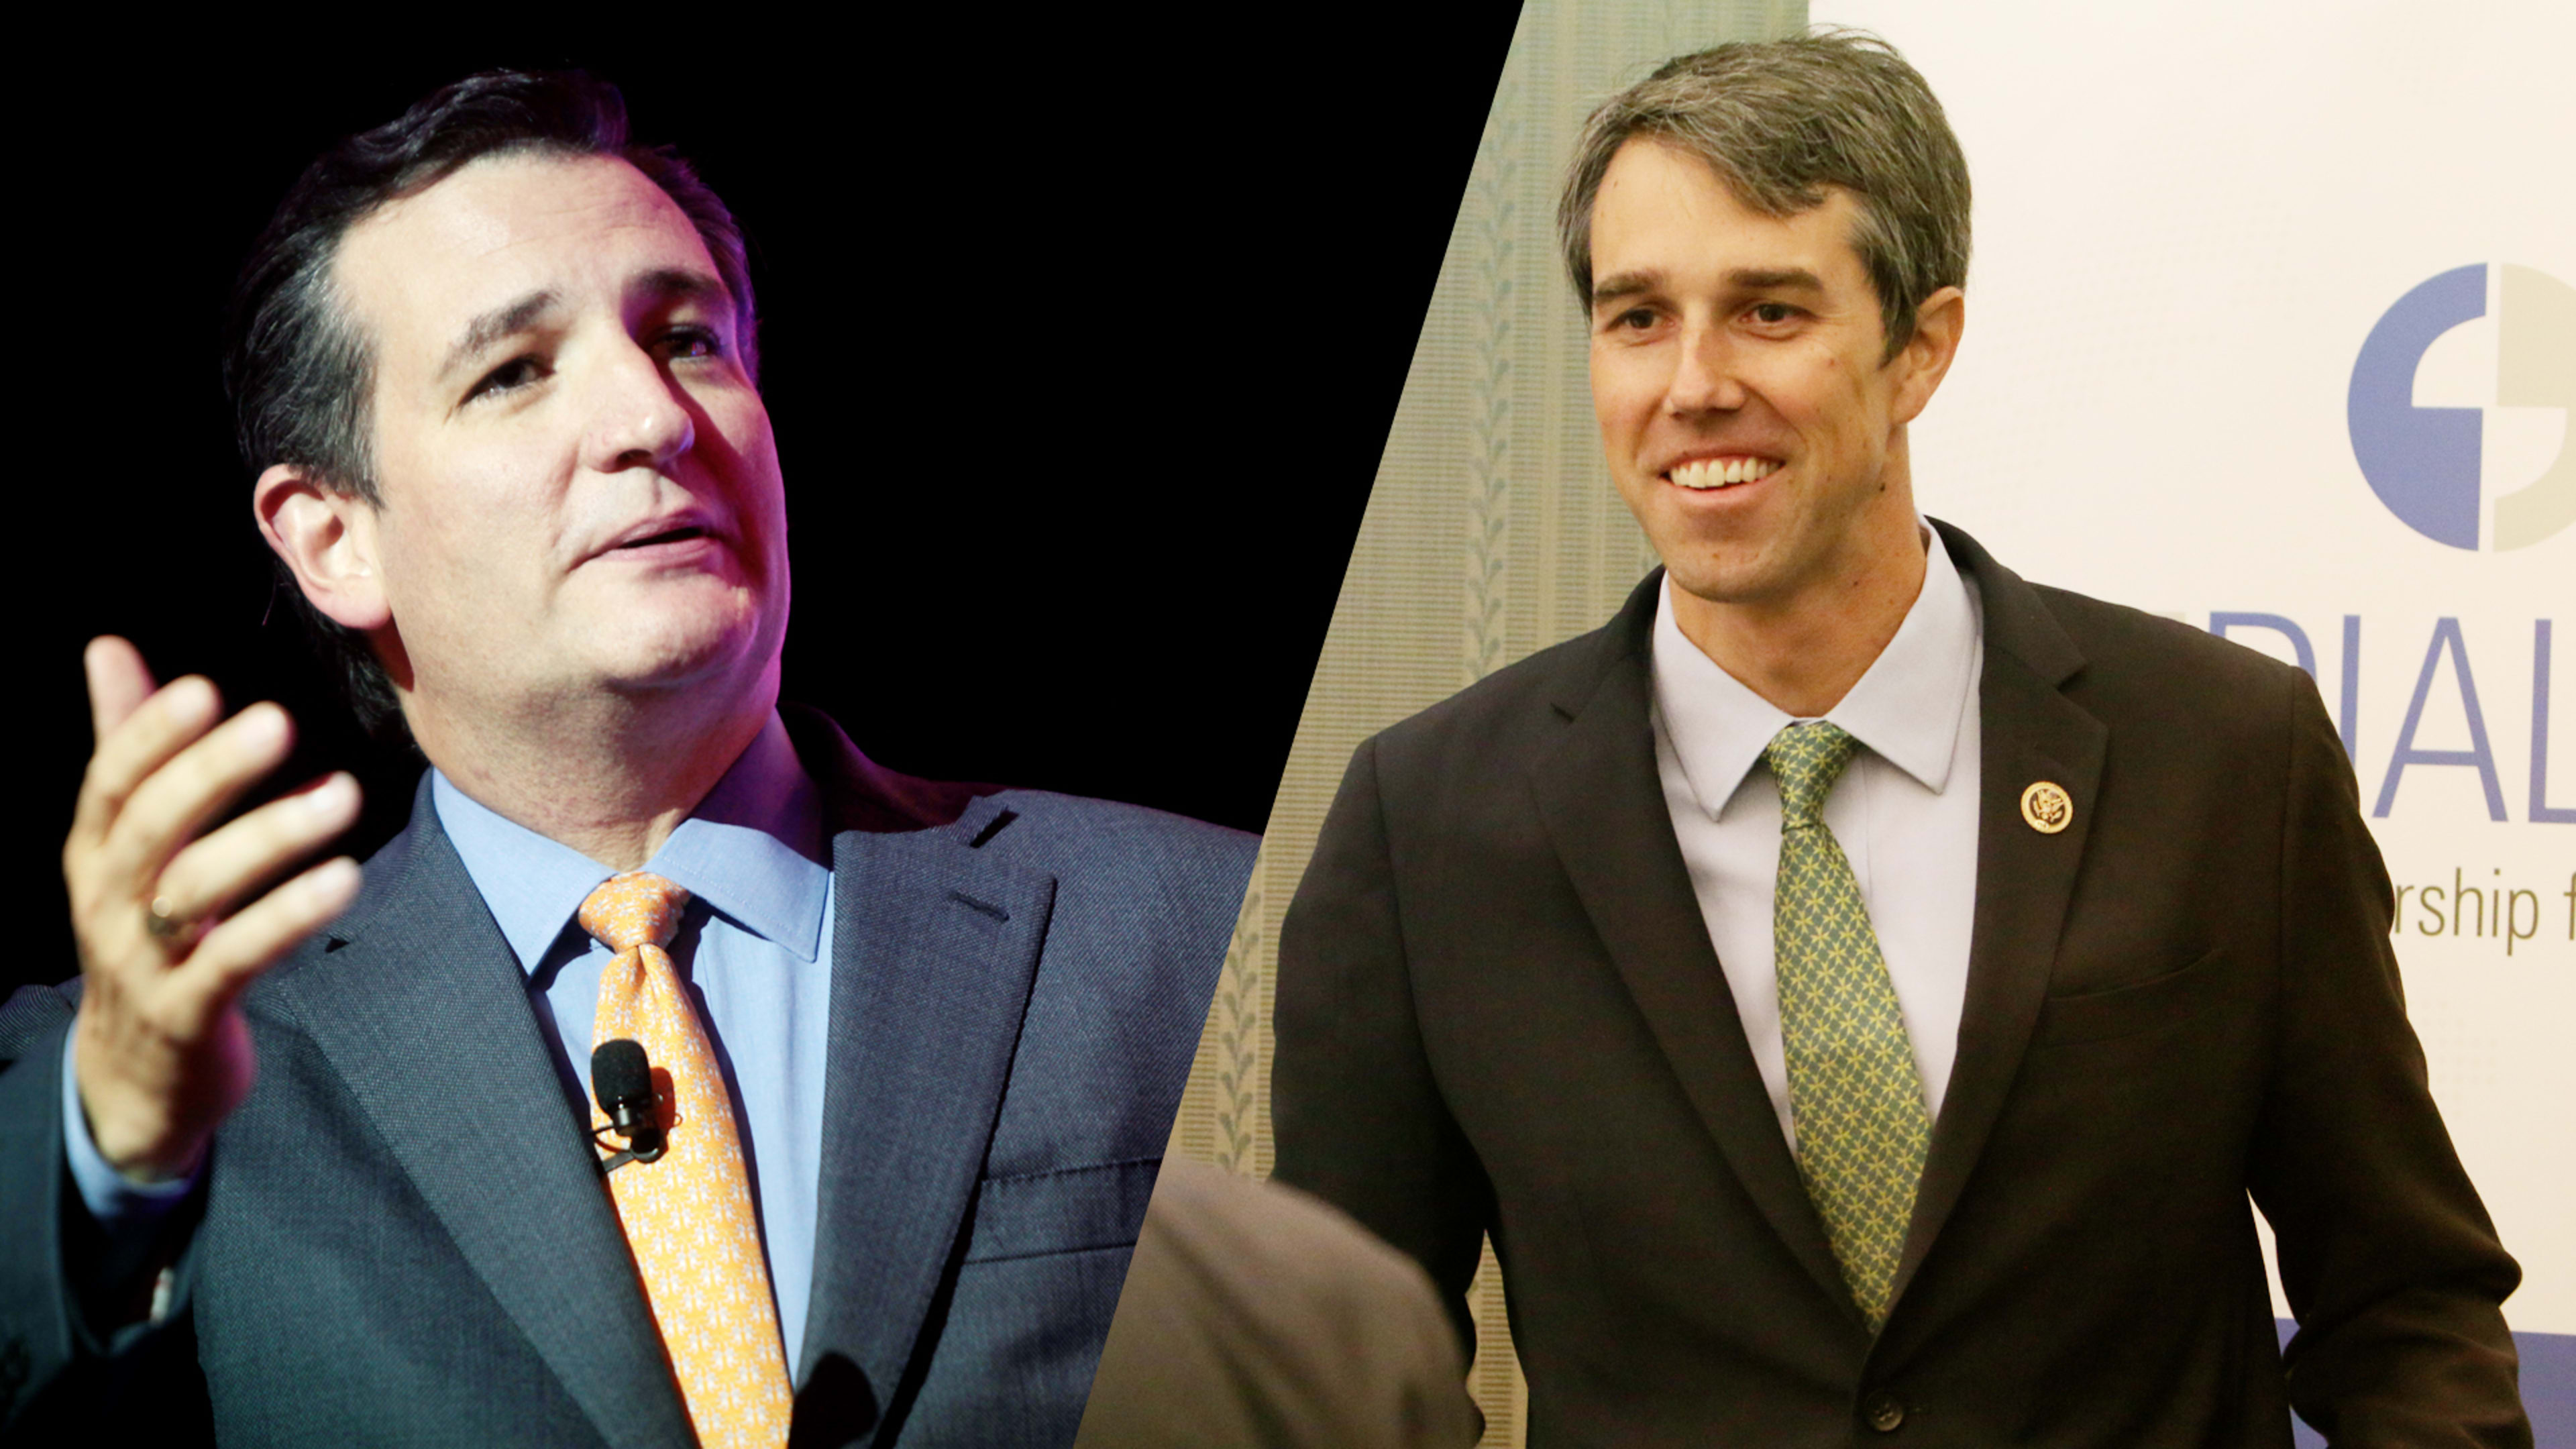 How to watch the Ted Cruz-Beto O’Rourke debate live online